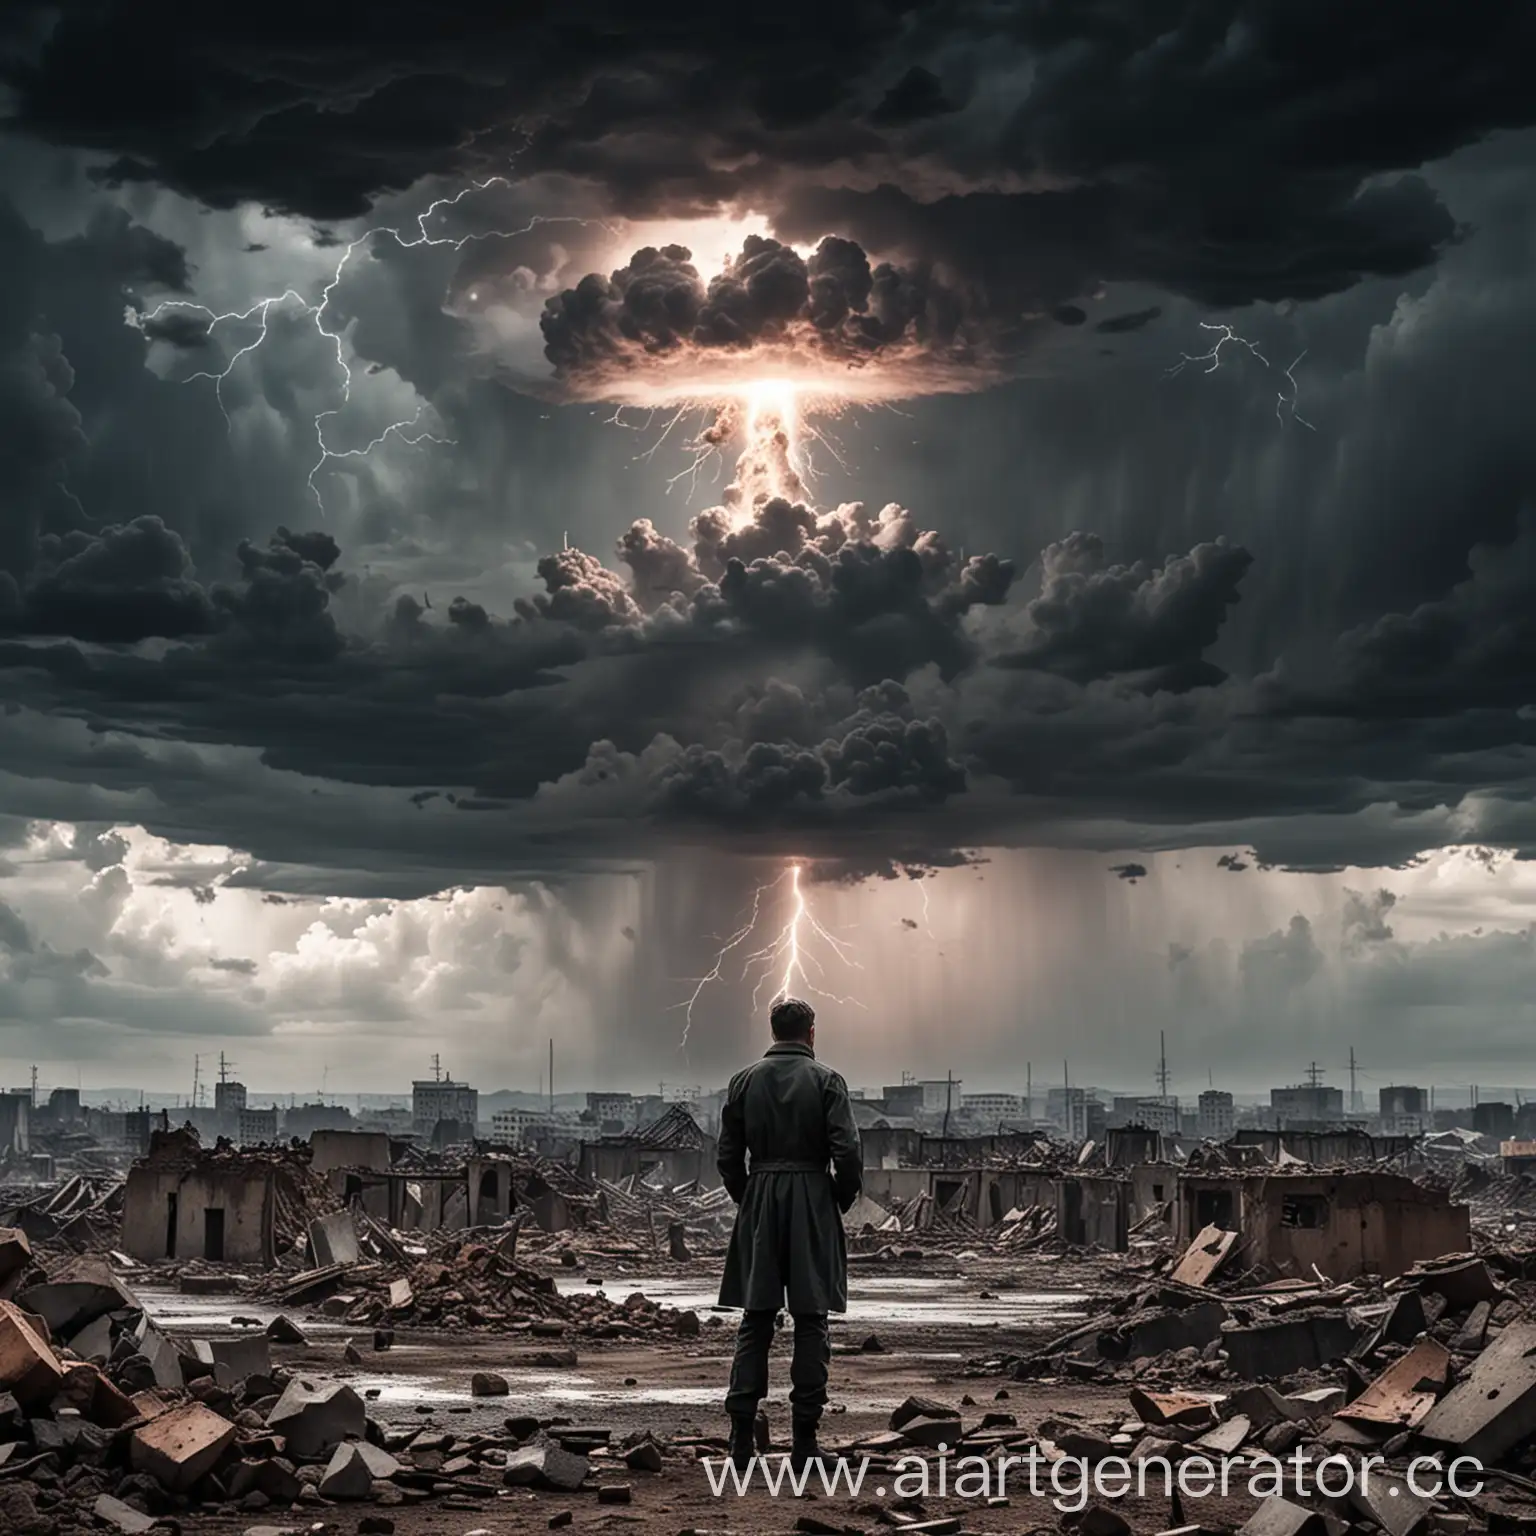 A man stands on the ruins of a city.  There is a nuclear bomb explosion in the distance.  Black clouds covered the sky.   strong lightning.